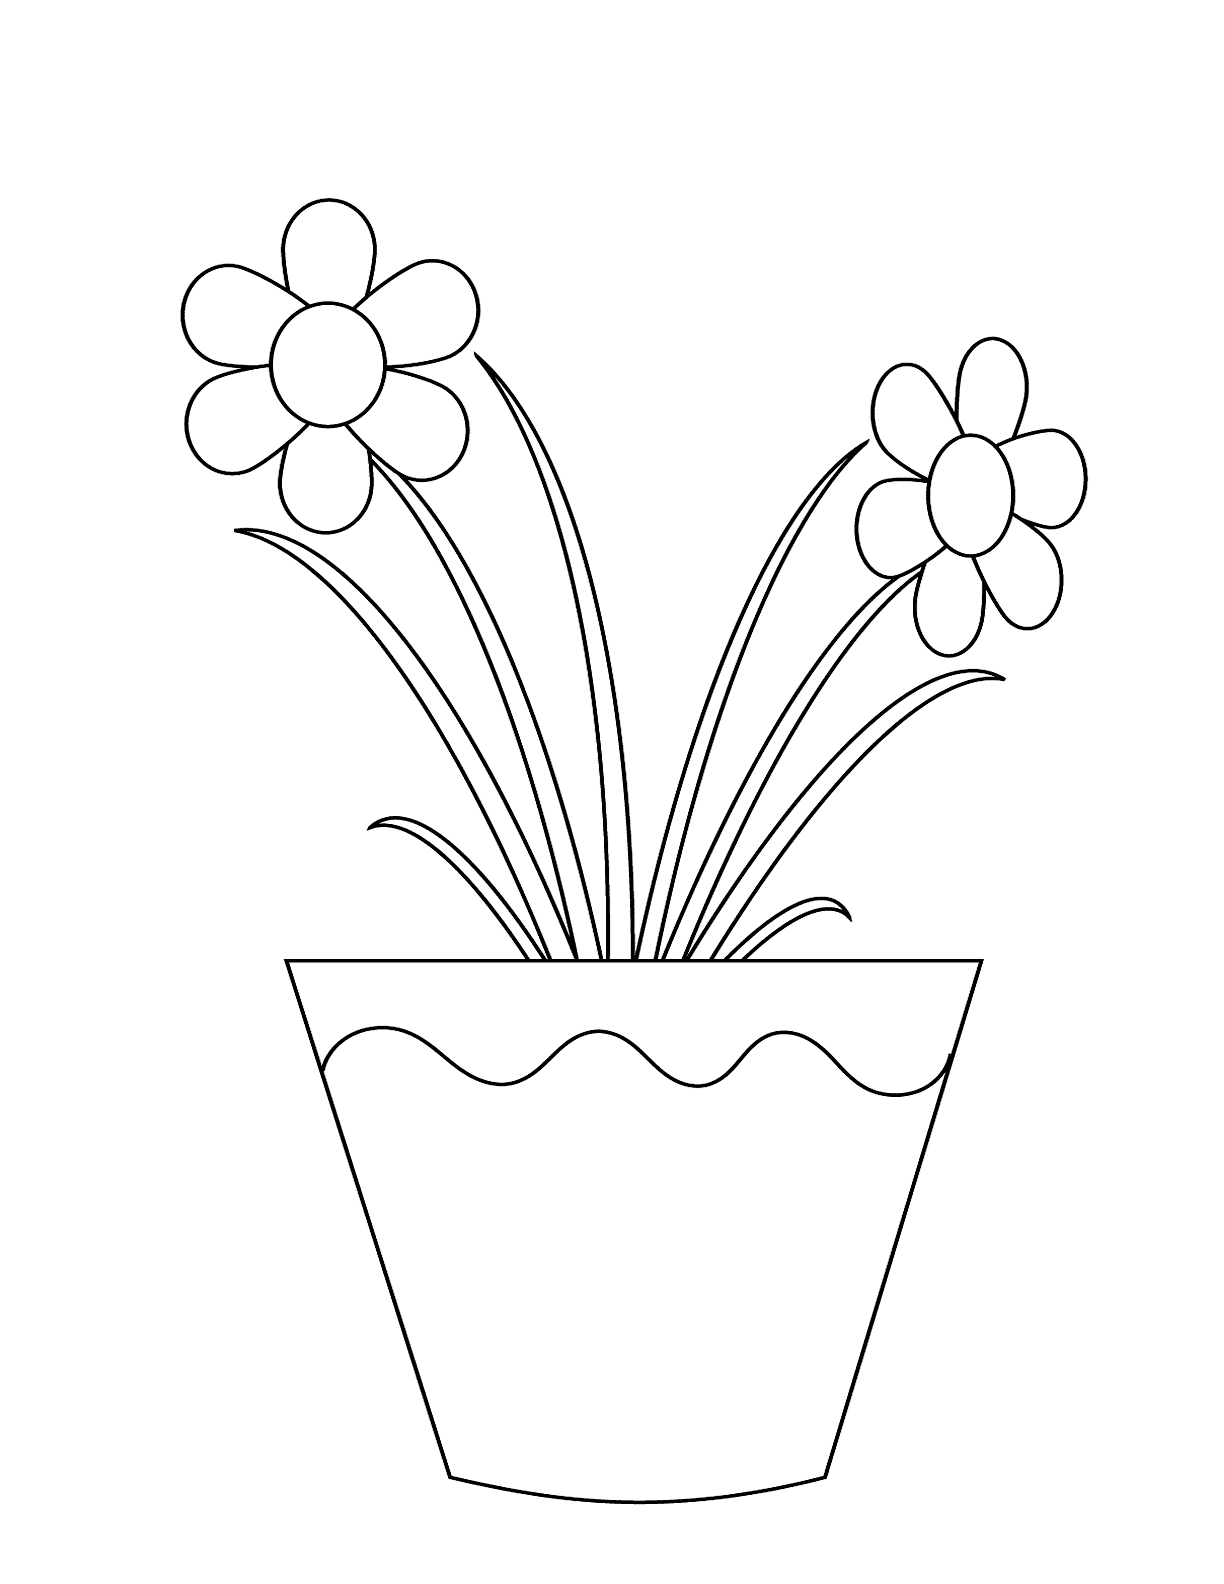 Flower Pot Of Daisies Coloring Page